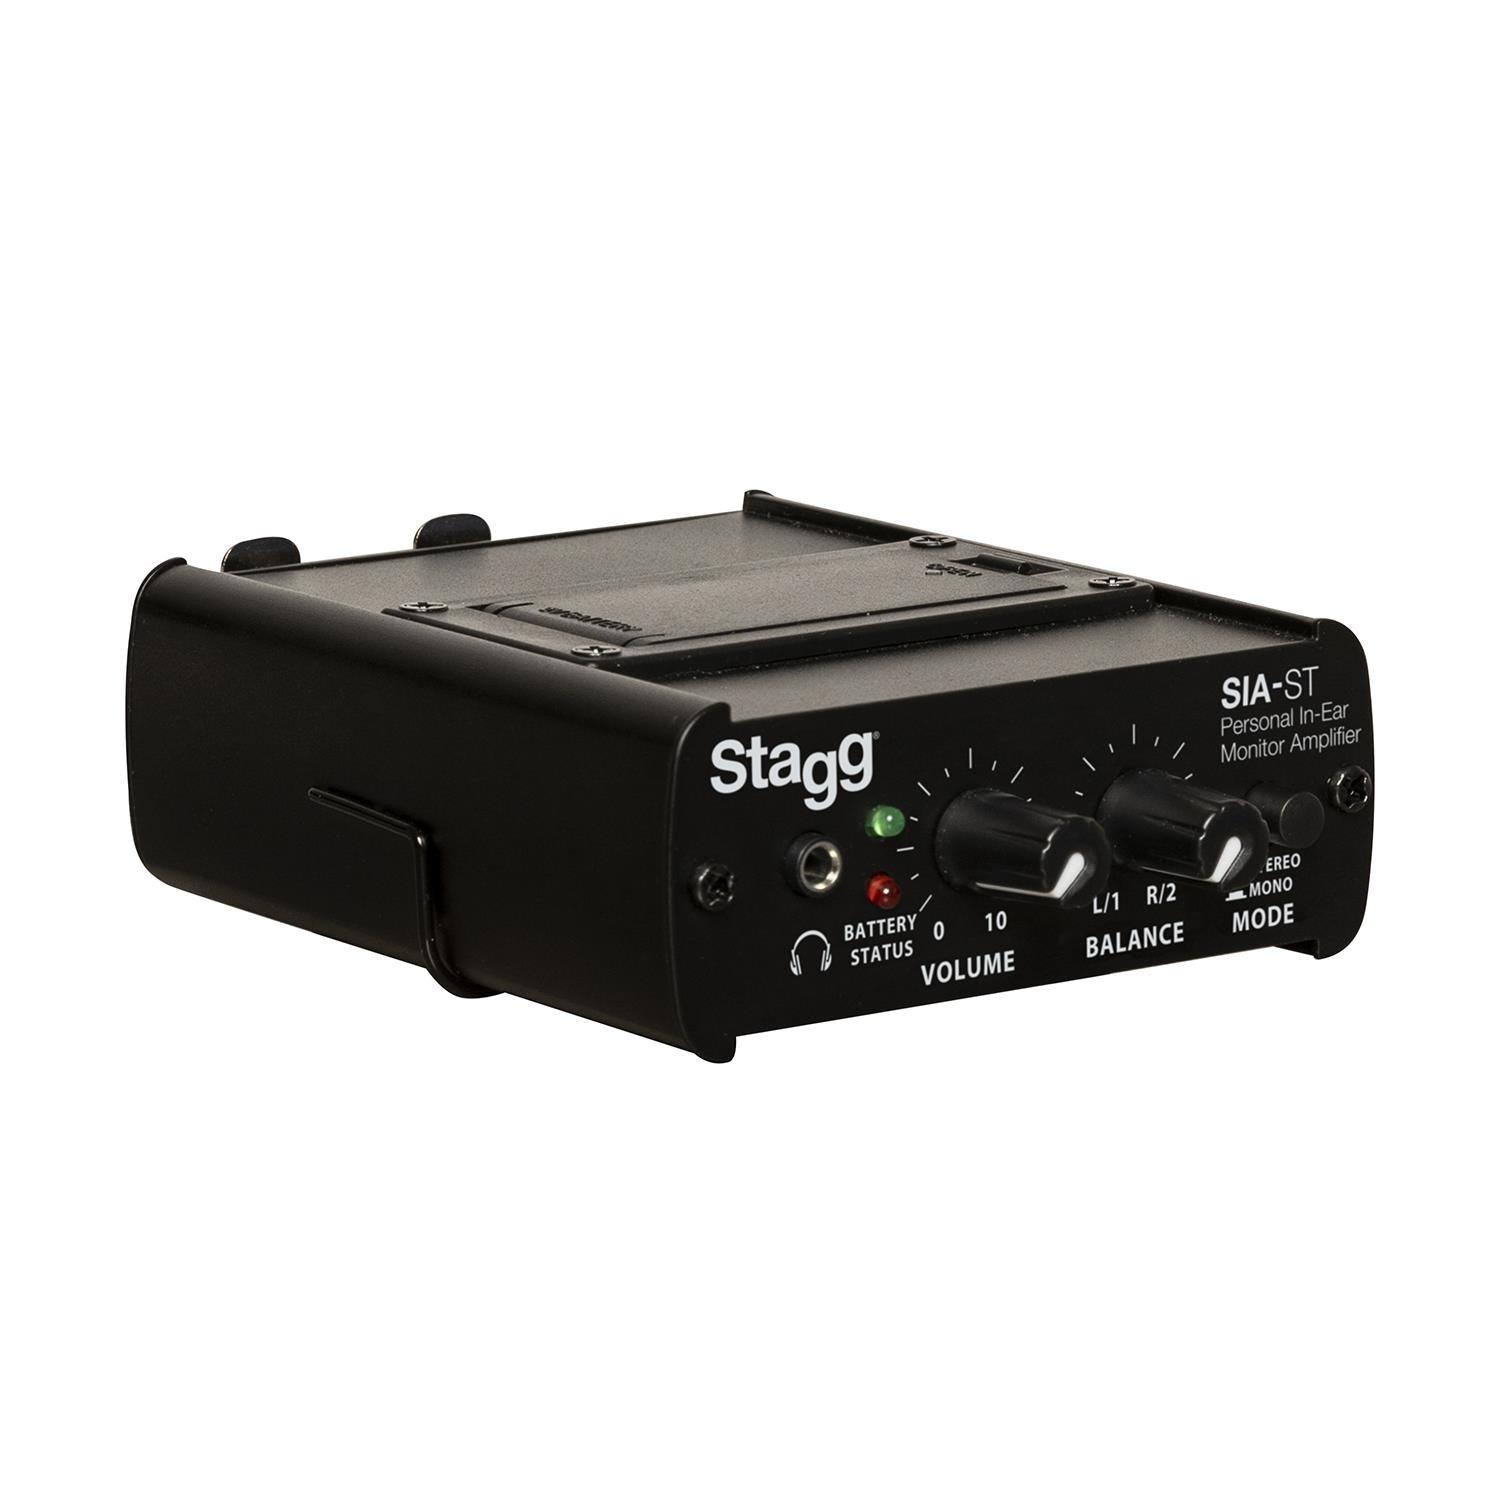 Stagg SIA-ST Wired IN-EAR Monitor Amplifier - DY Pro Audio